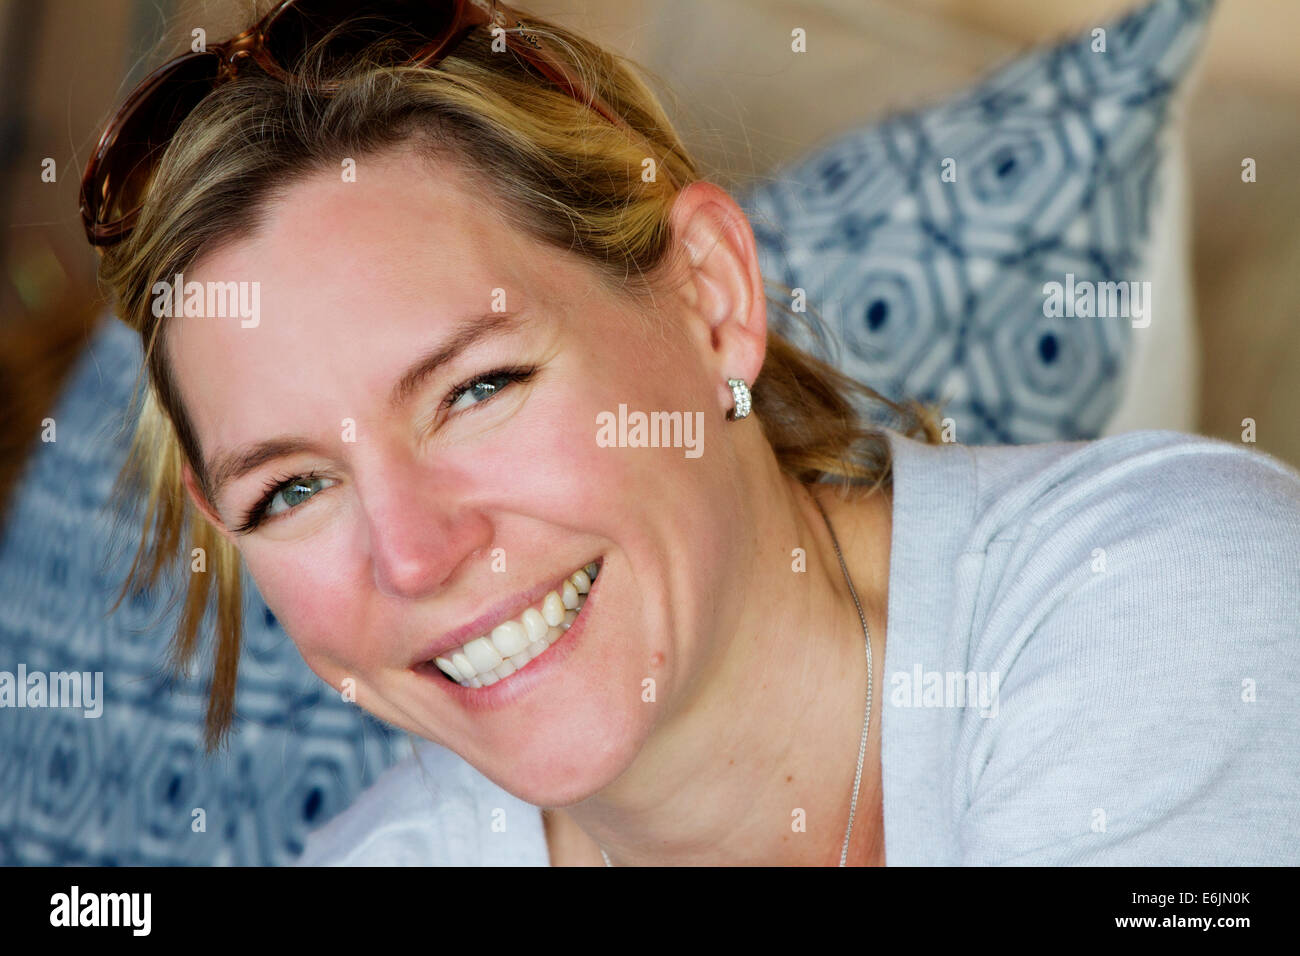 Smiling blond lady in her late thirties Stock Photo